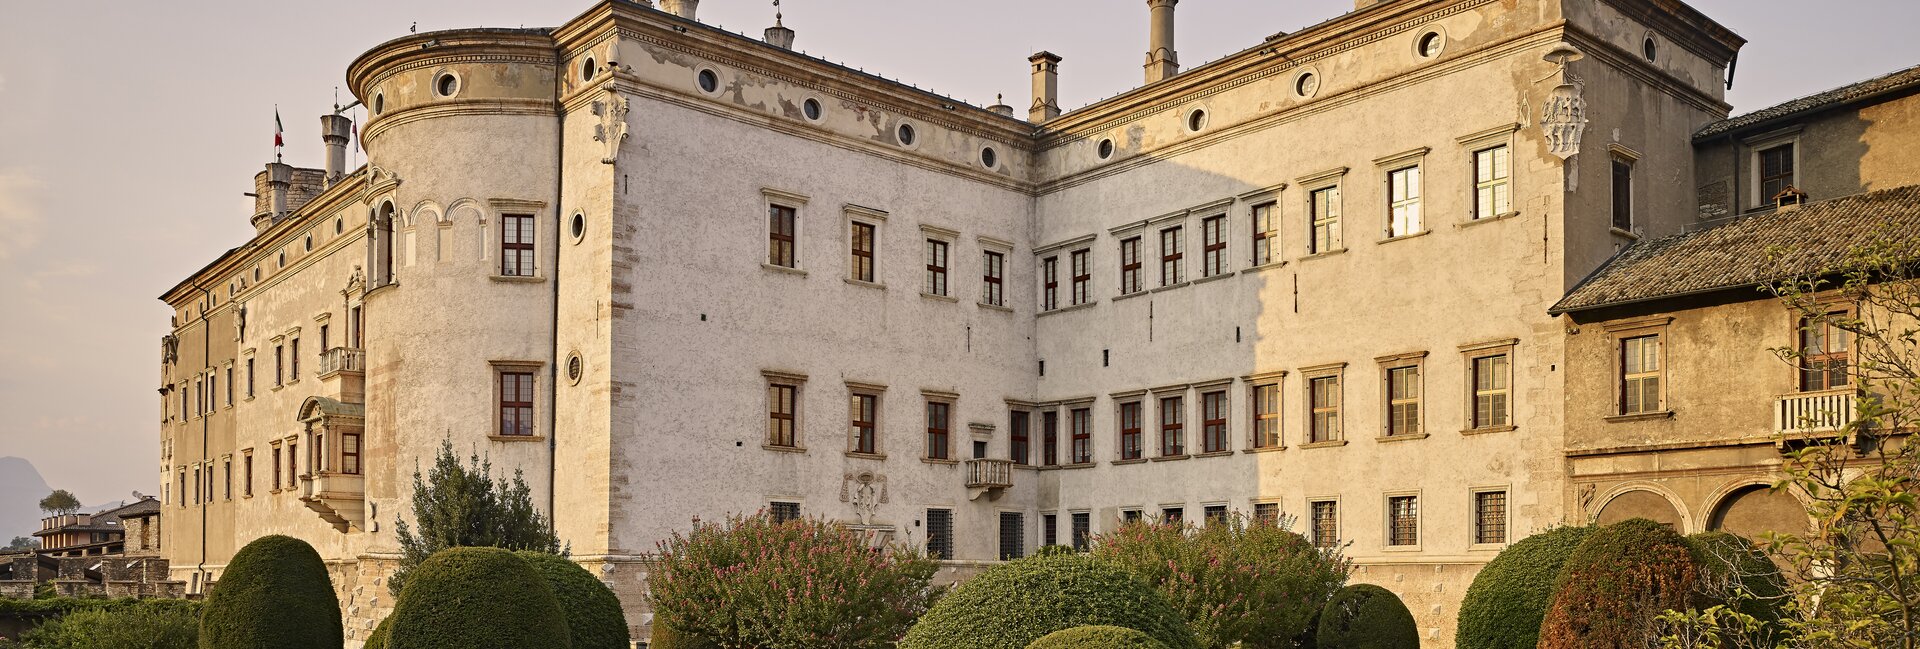 Trento what to visit - Buonconsiglio castle is the most important castle in Trento italy